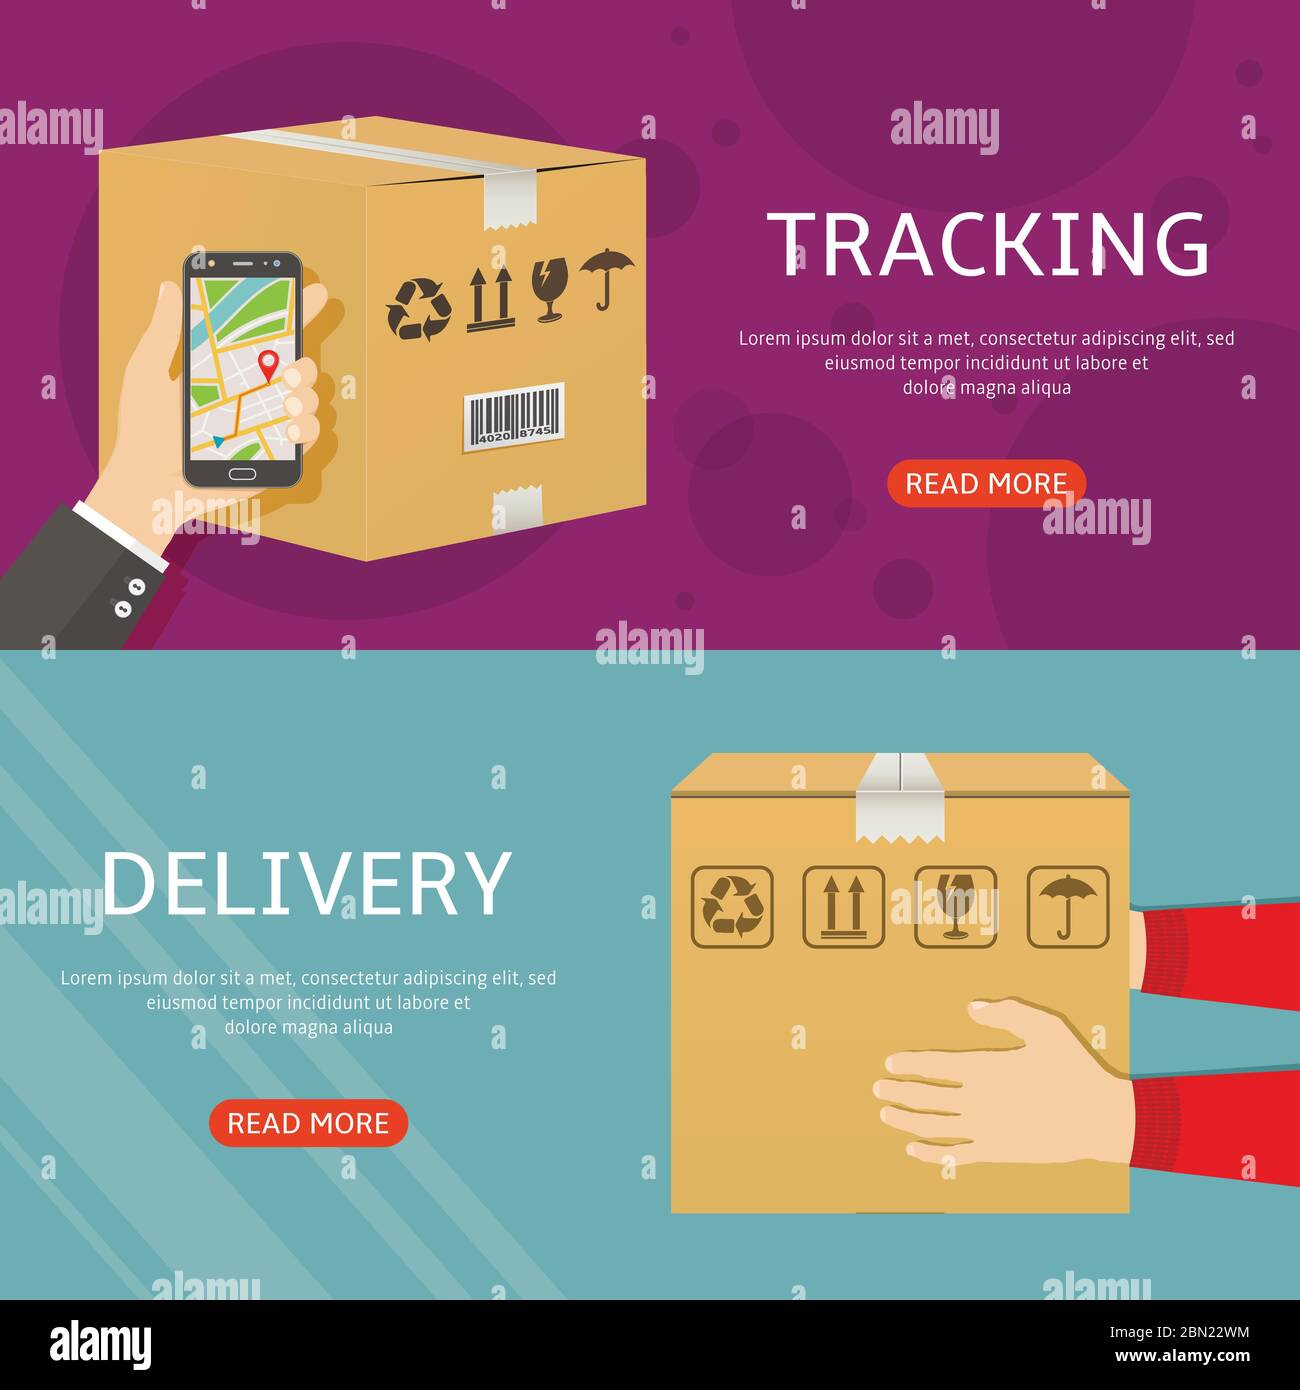 Delivery web banners flat design vector illustration Stock Vector